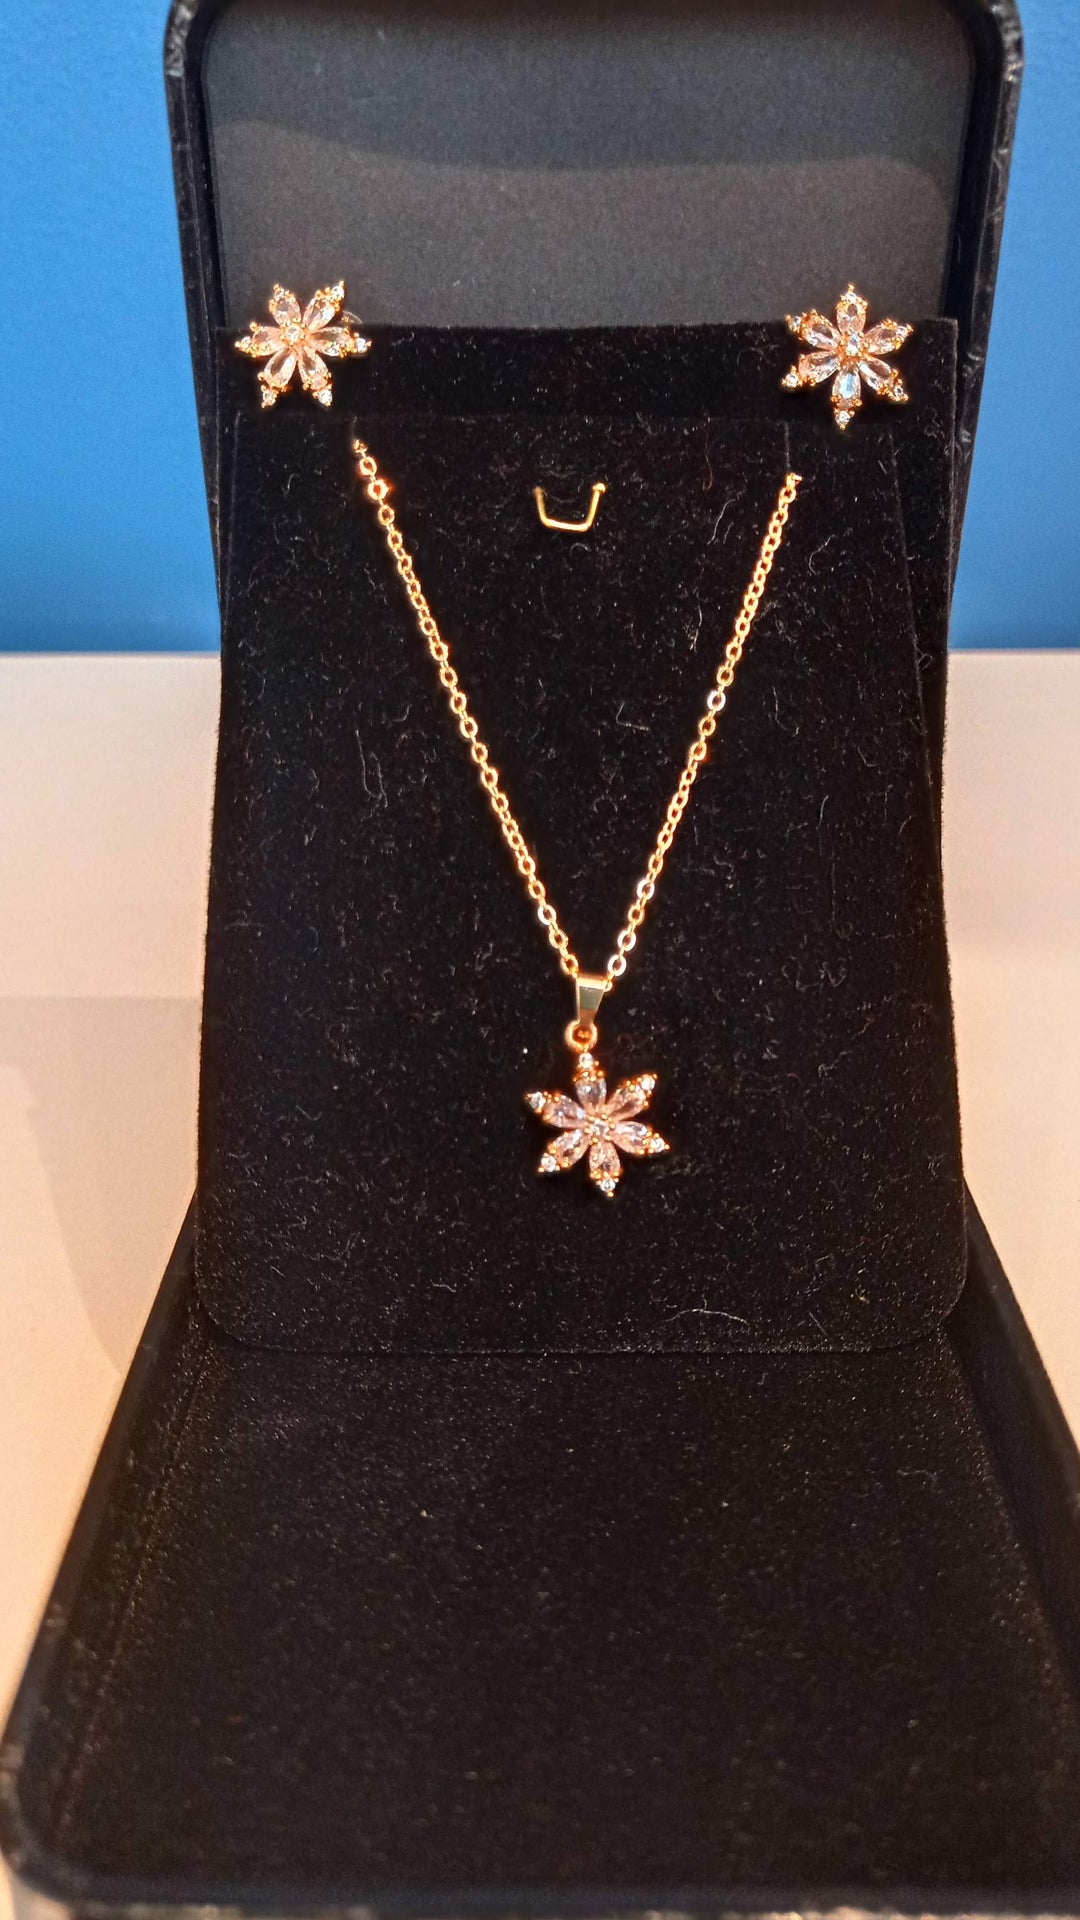 Constellations Star Silver White Stone Pendant Necklace and Earrings Set